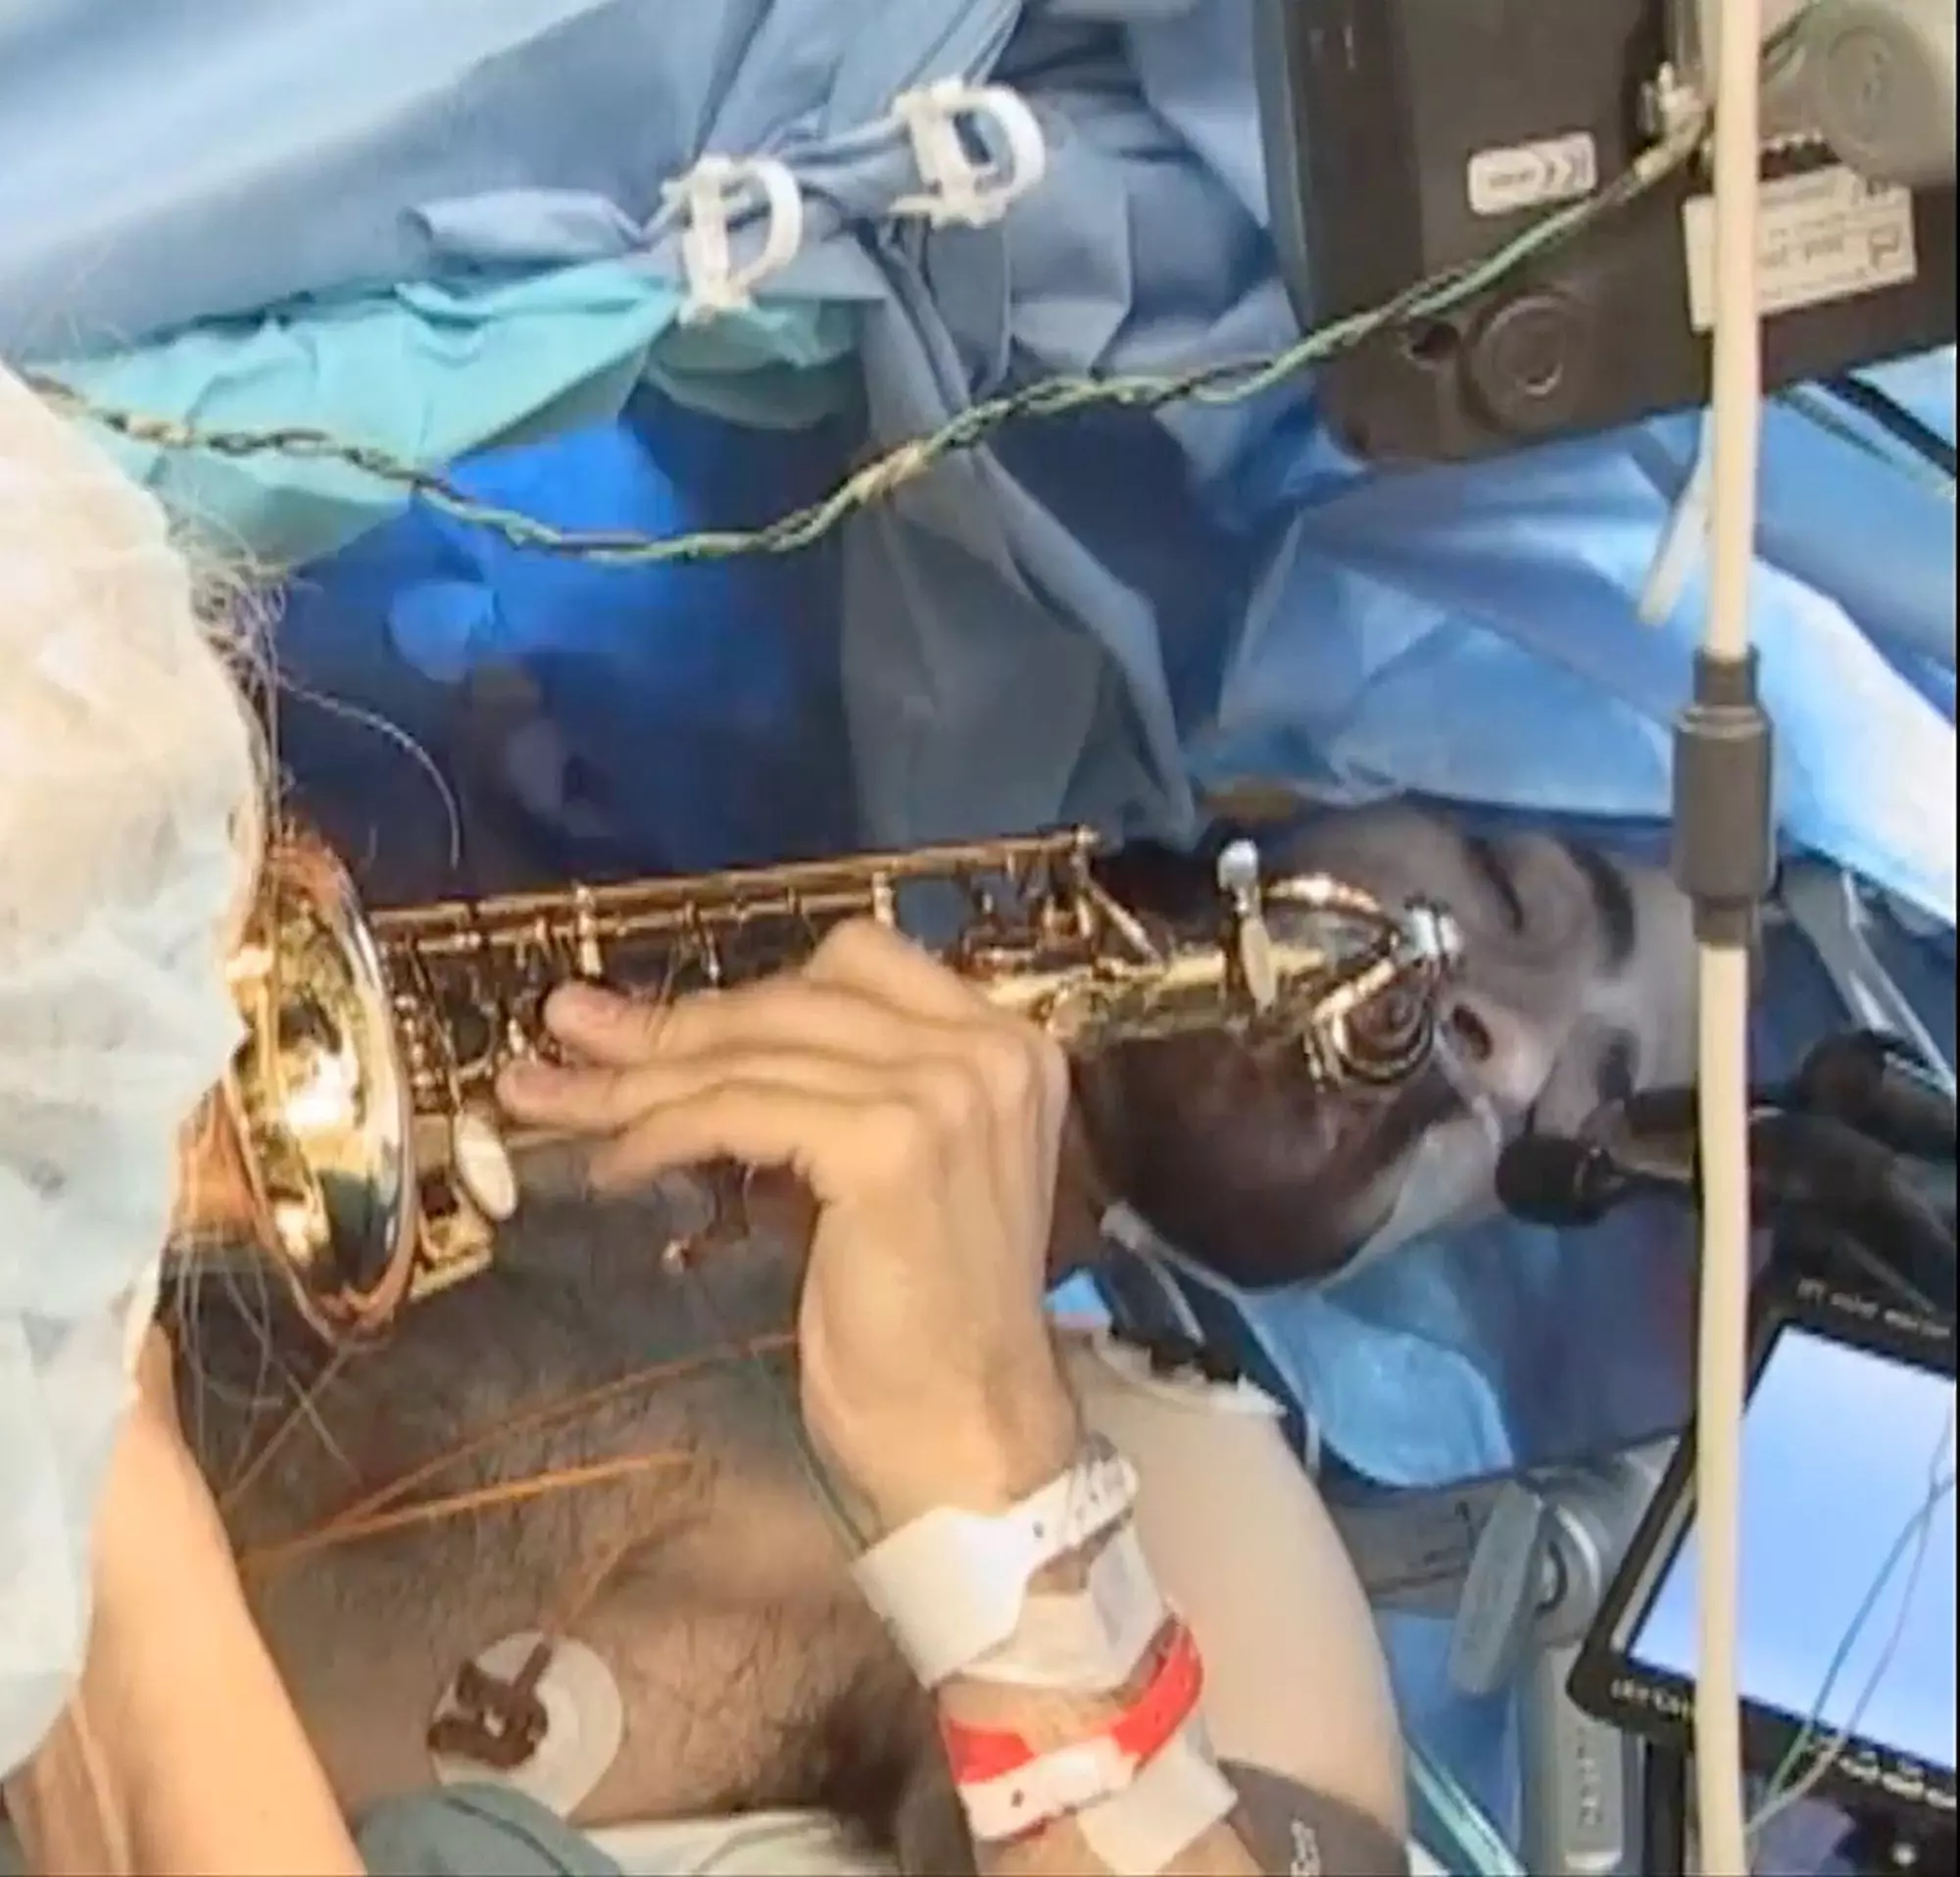 Musician plays sax during brain surgery to prove his skills are